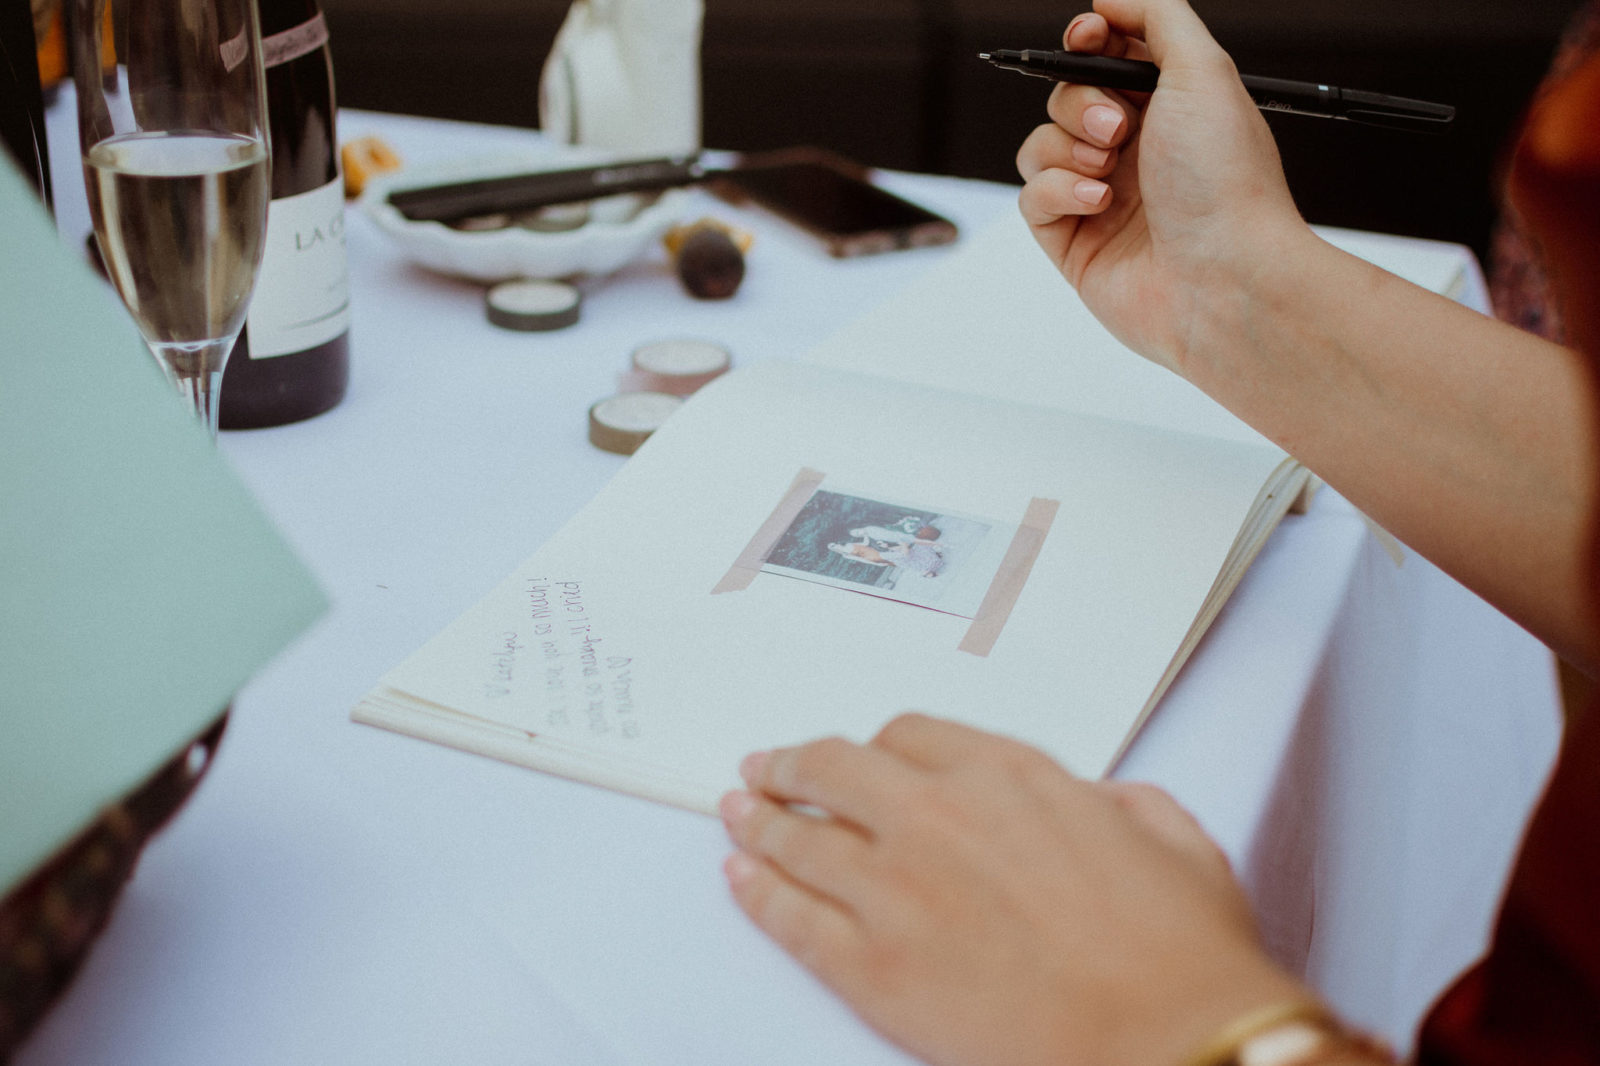 Persoanlized wedding guest book with instant camera, unique guest book ideas